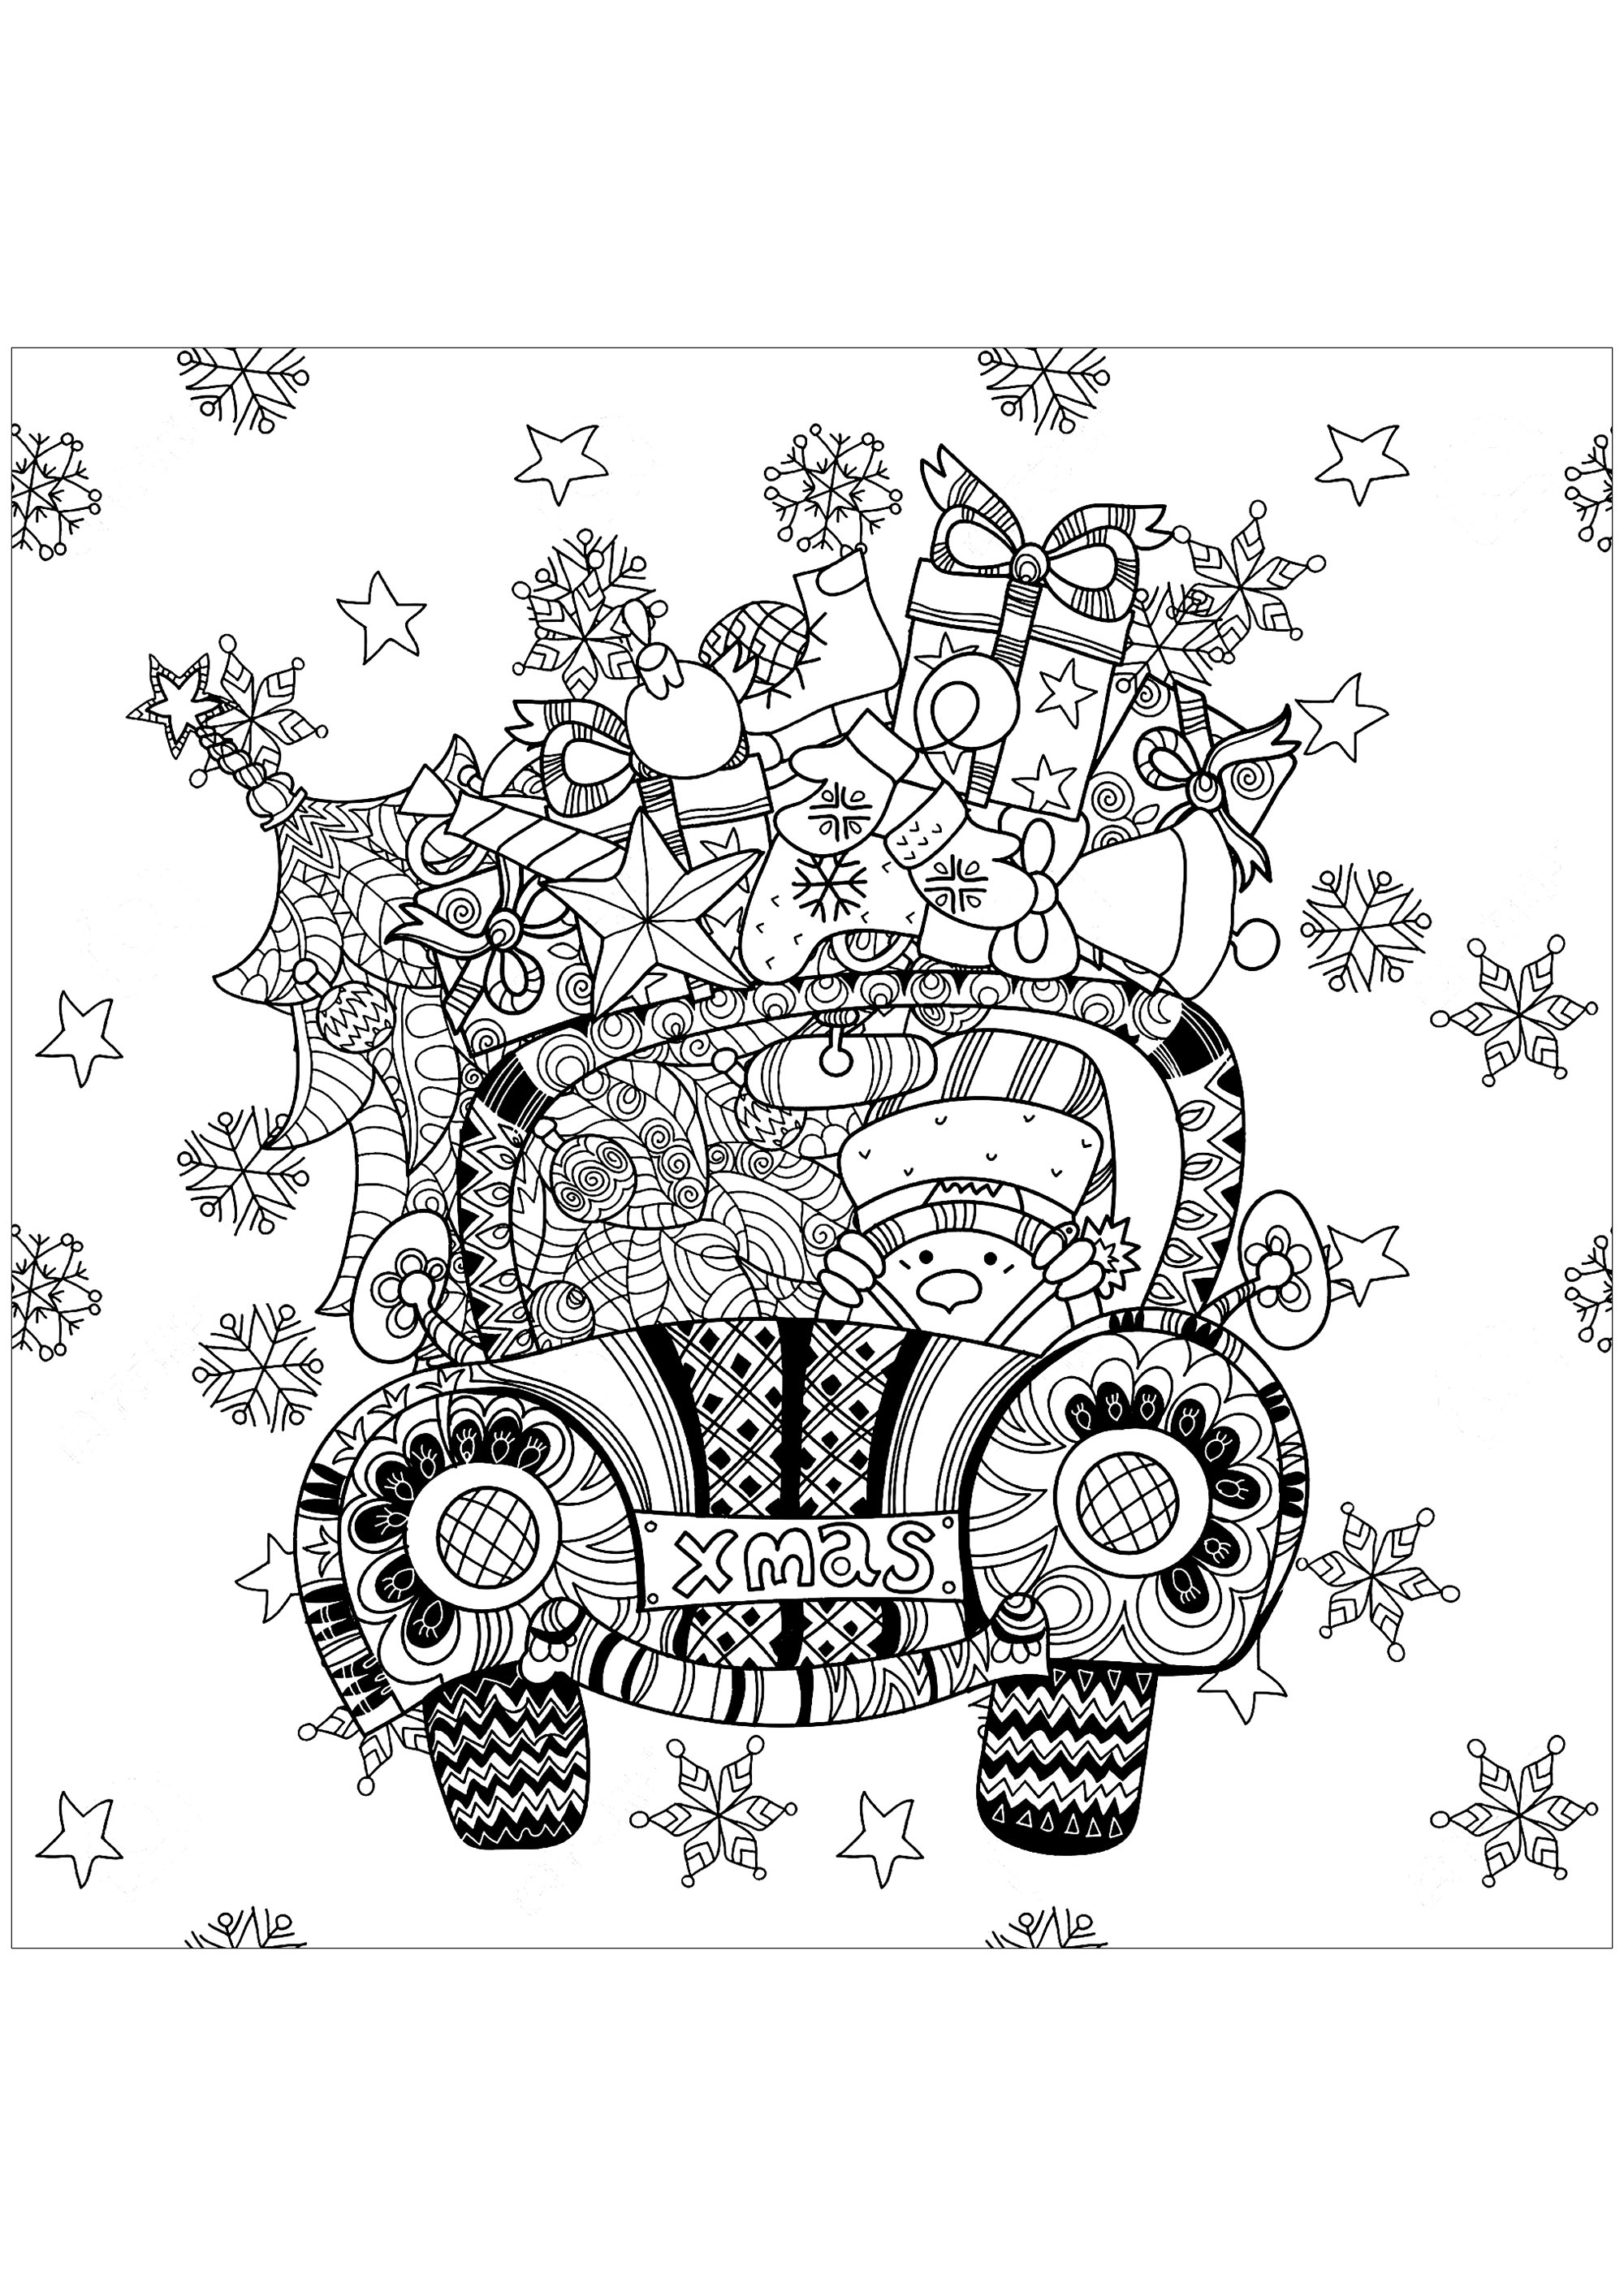 Add color to the gifts that fill this little car driven by a snowman. This coloring page is the perfect way to get into the Christmas spirit. It's fun and inspiring, and you can personalize it to your heart's content.So grab your crayons and have fun!, Source : 123rf   Artist : Ирина Язева